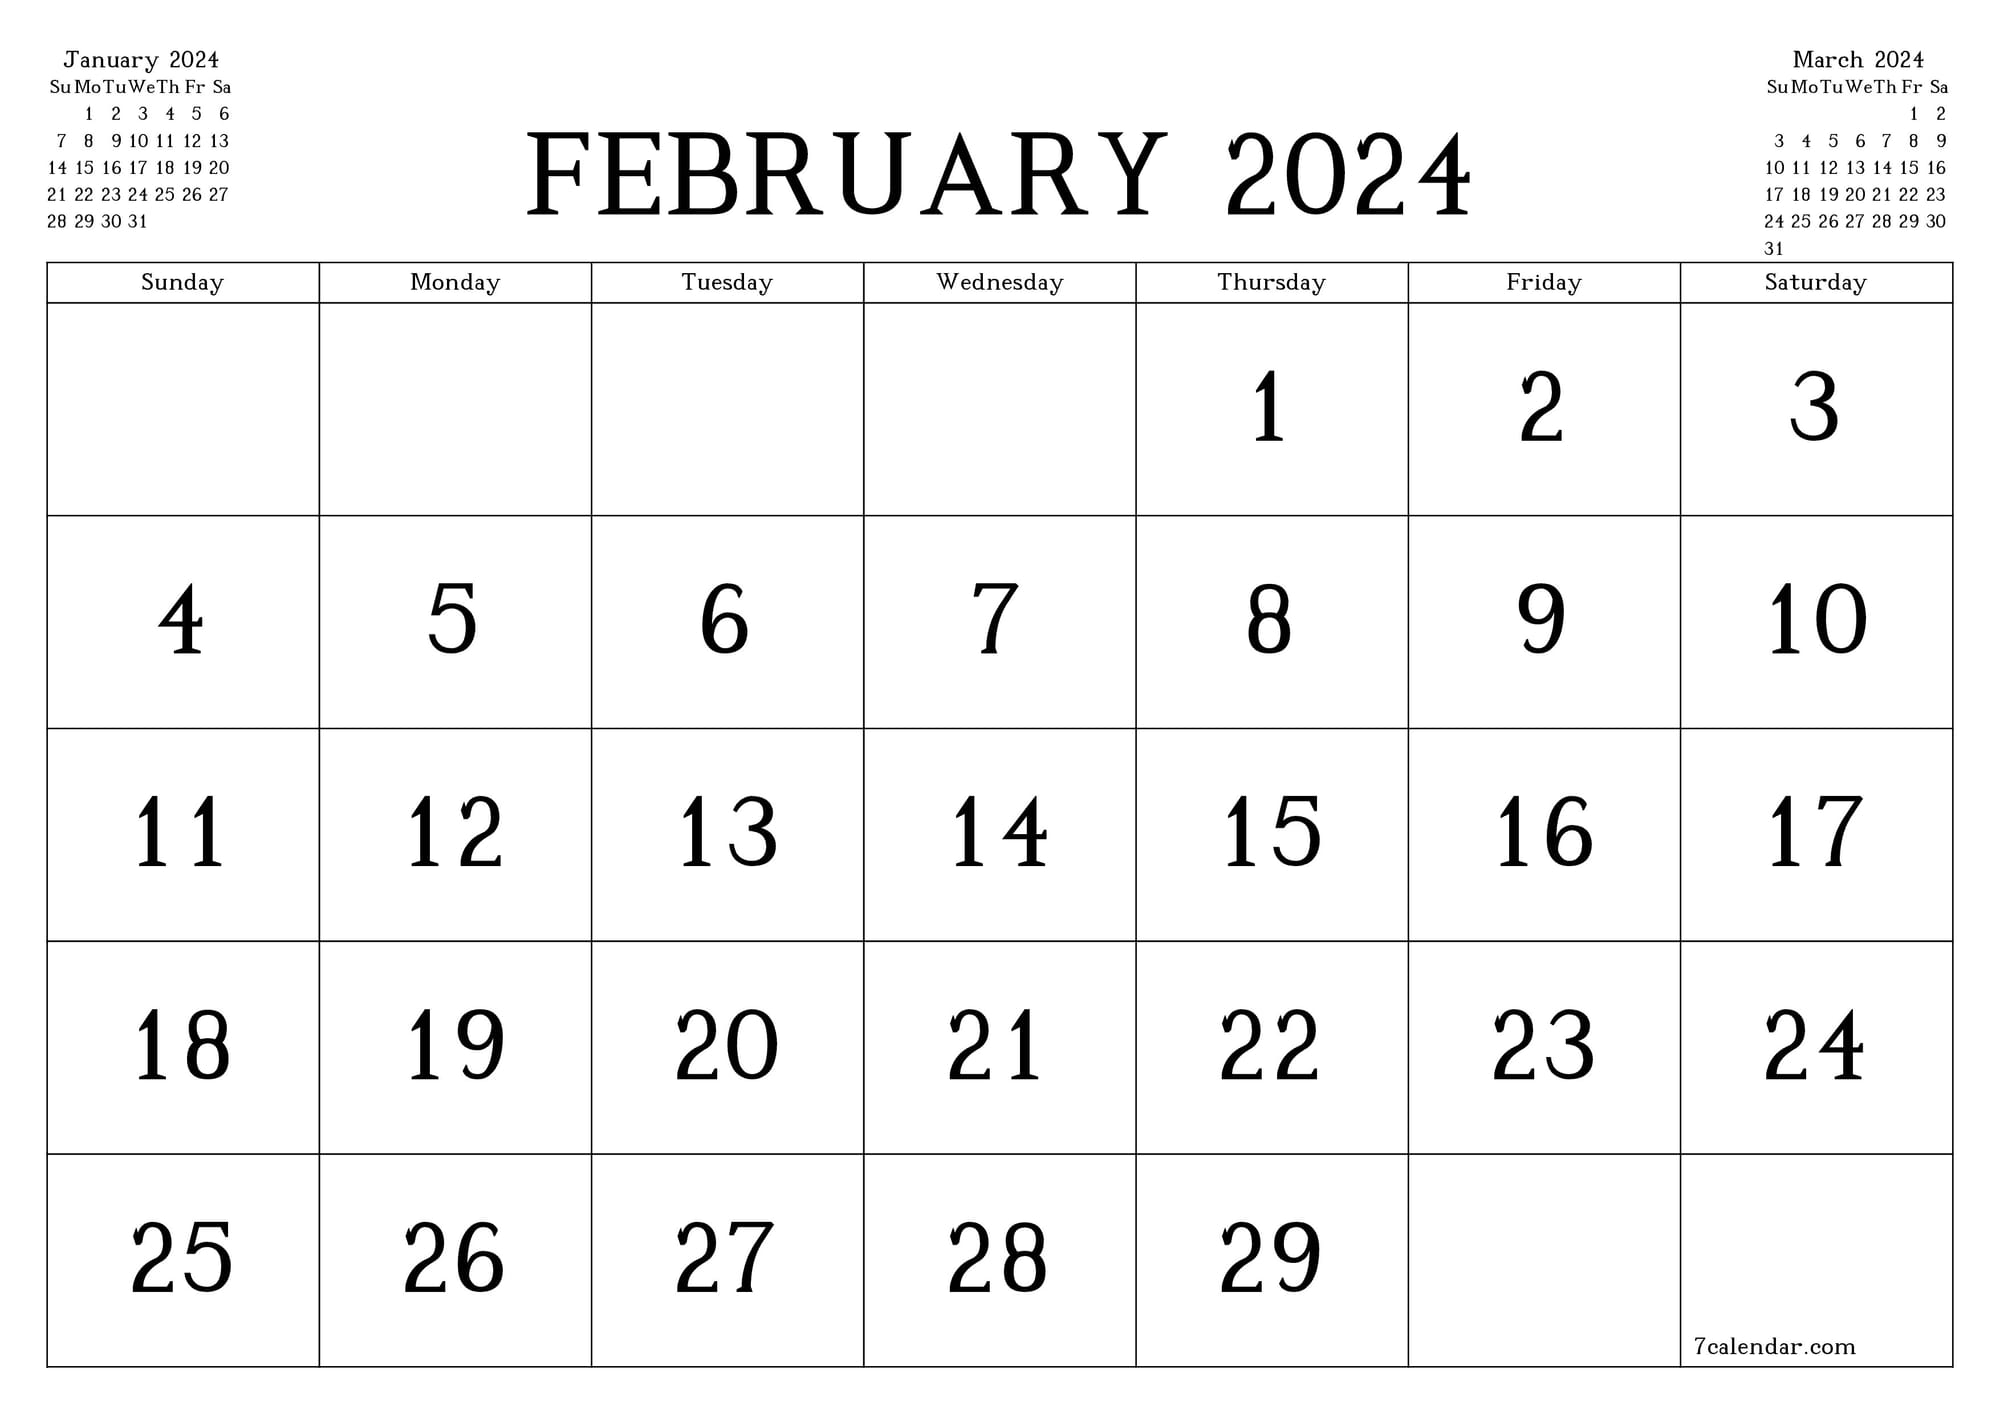 leapyear